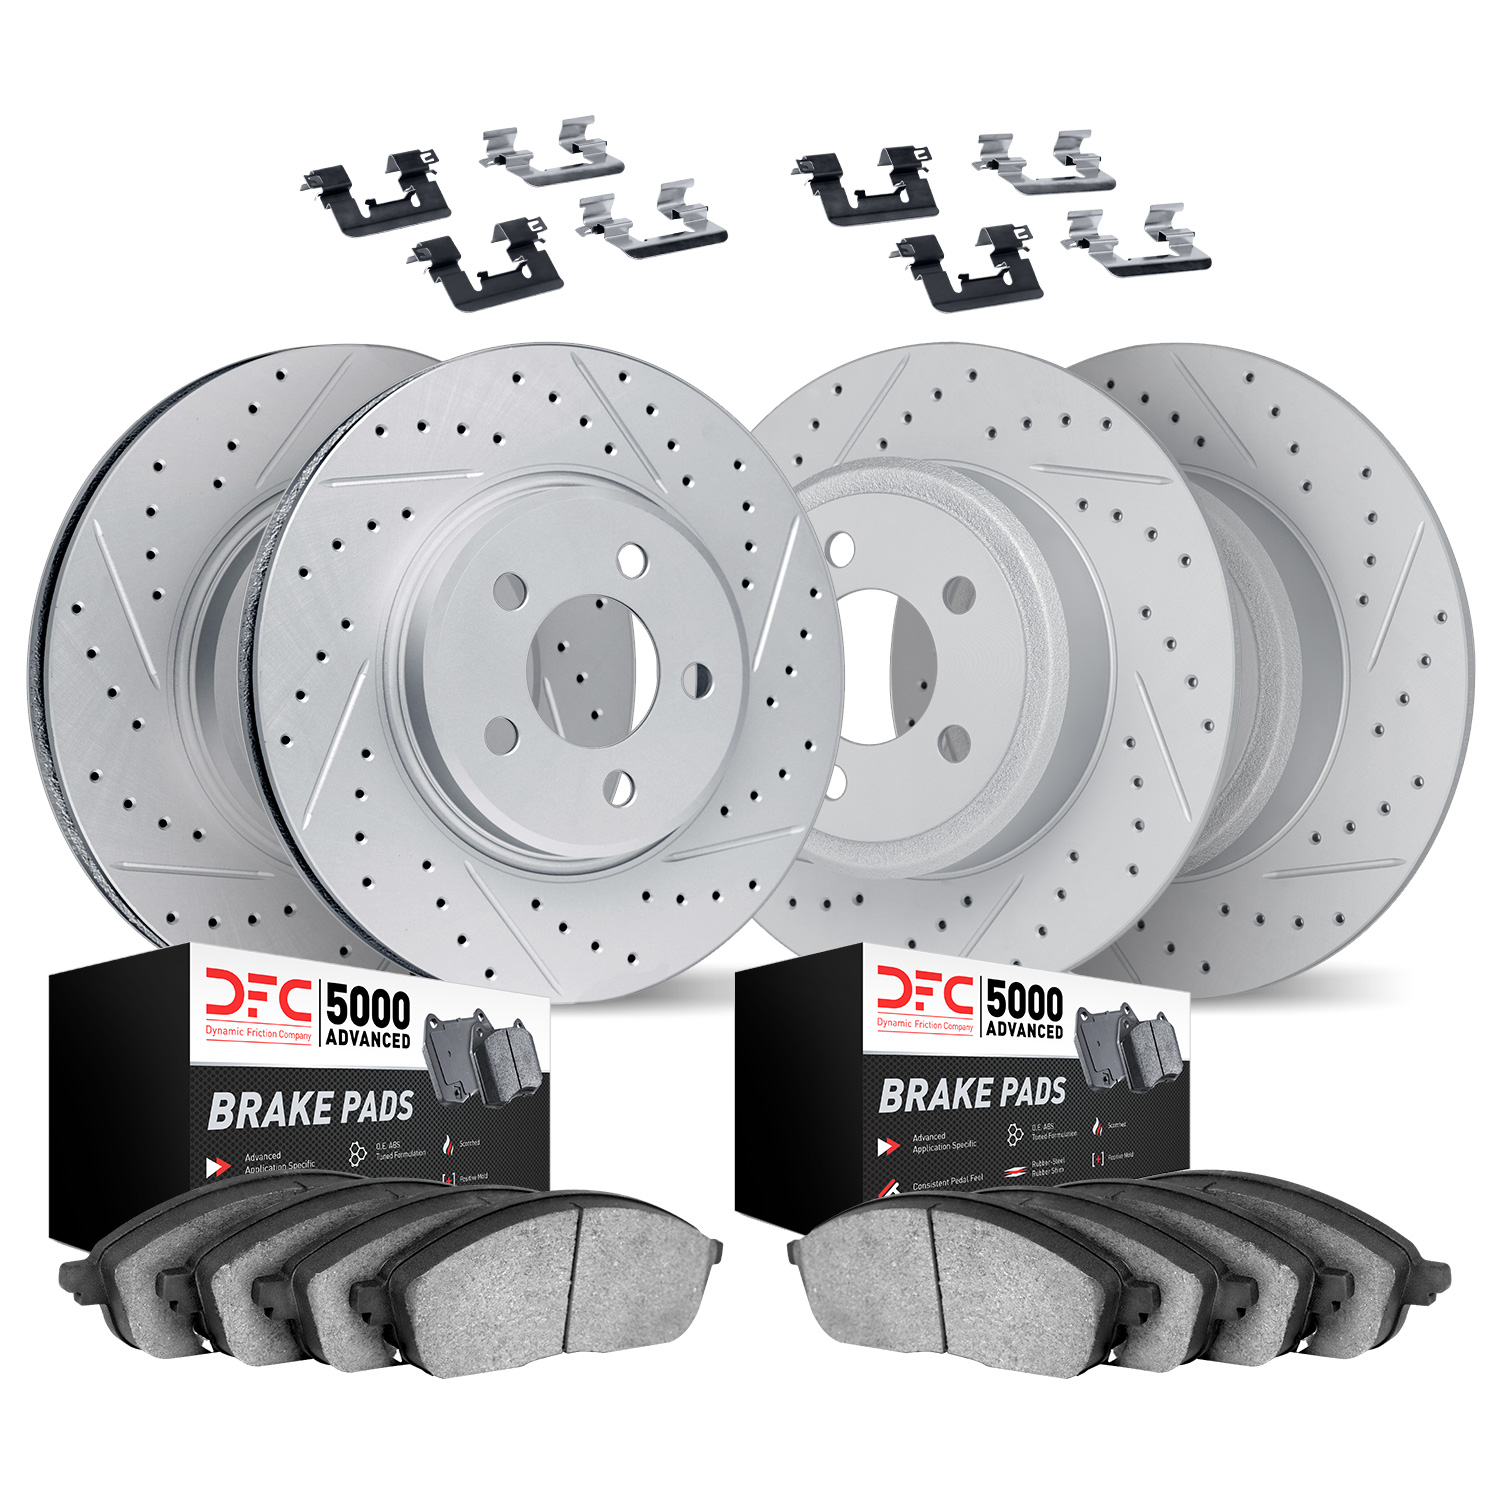 2514-45023 Geoperformance Drilled/Slotted Rotors w/5000 Advanced Brake Pads Kit & Hardware, 2013-2017 GM, Position: Front and Re